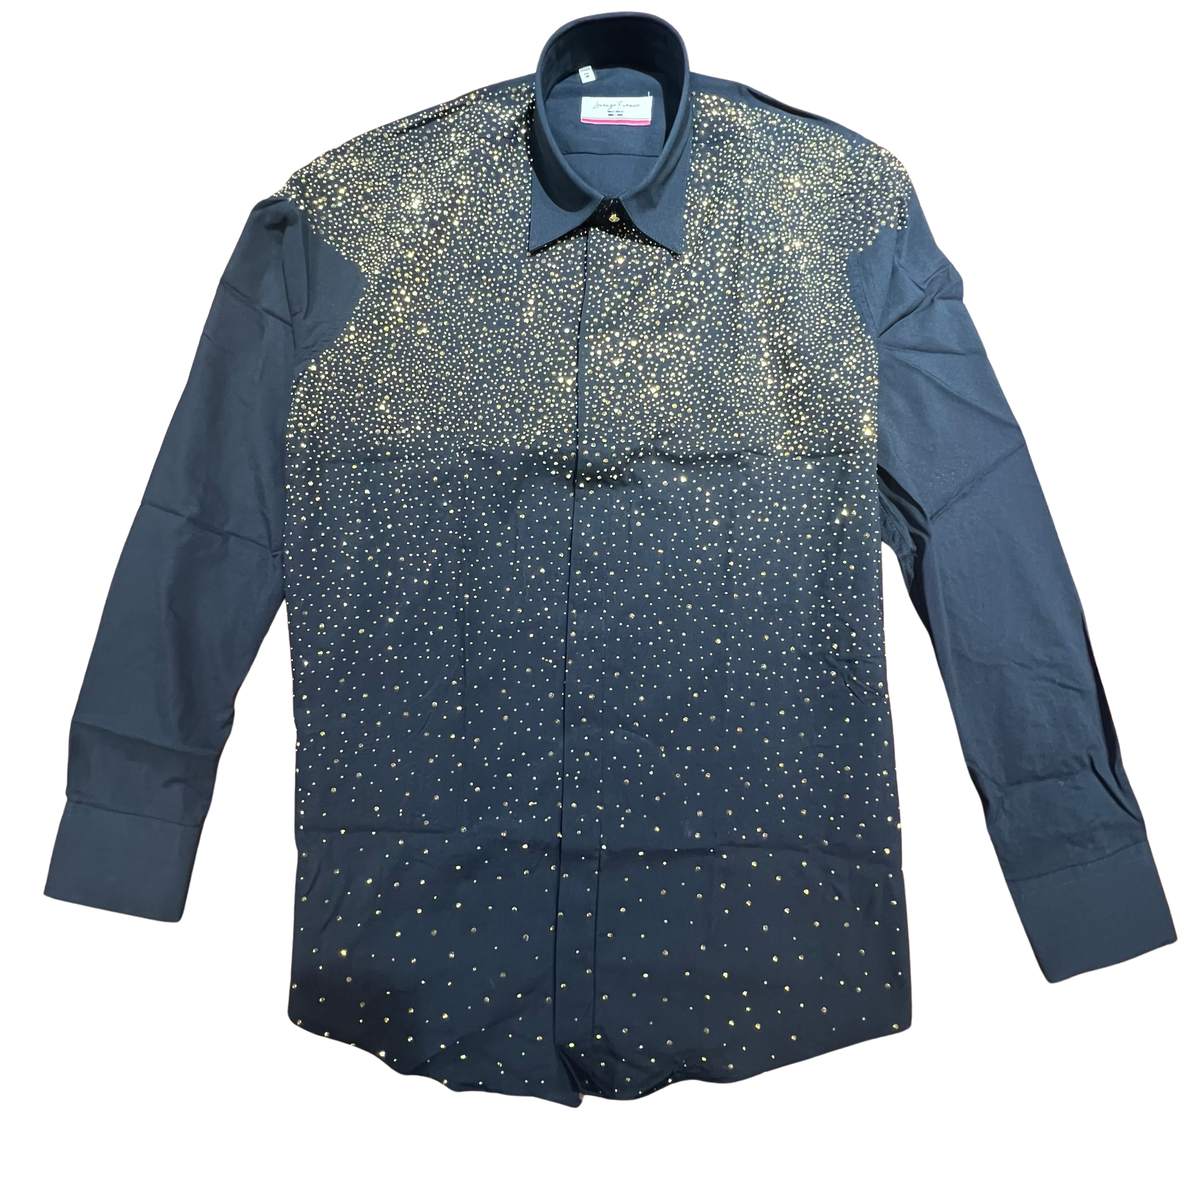 Lorenzzo Franco Black Gold Crystal Button Up Shirt - Dudes Boutique